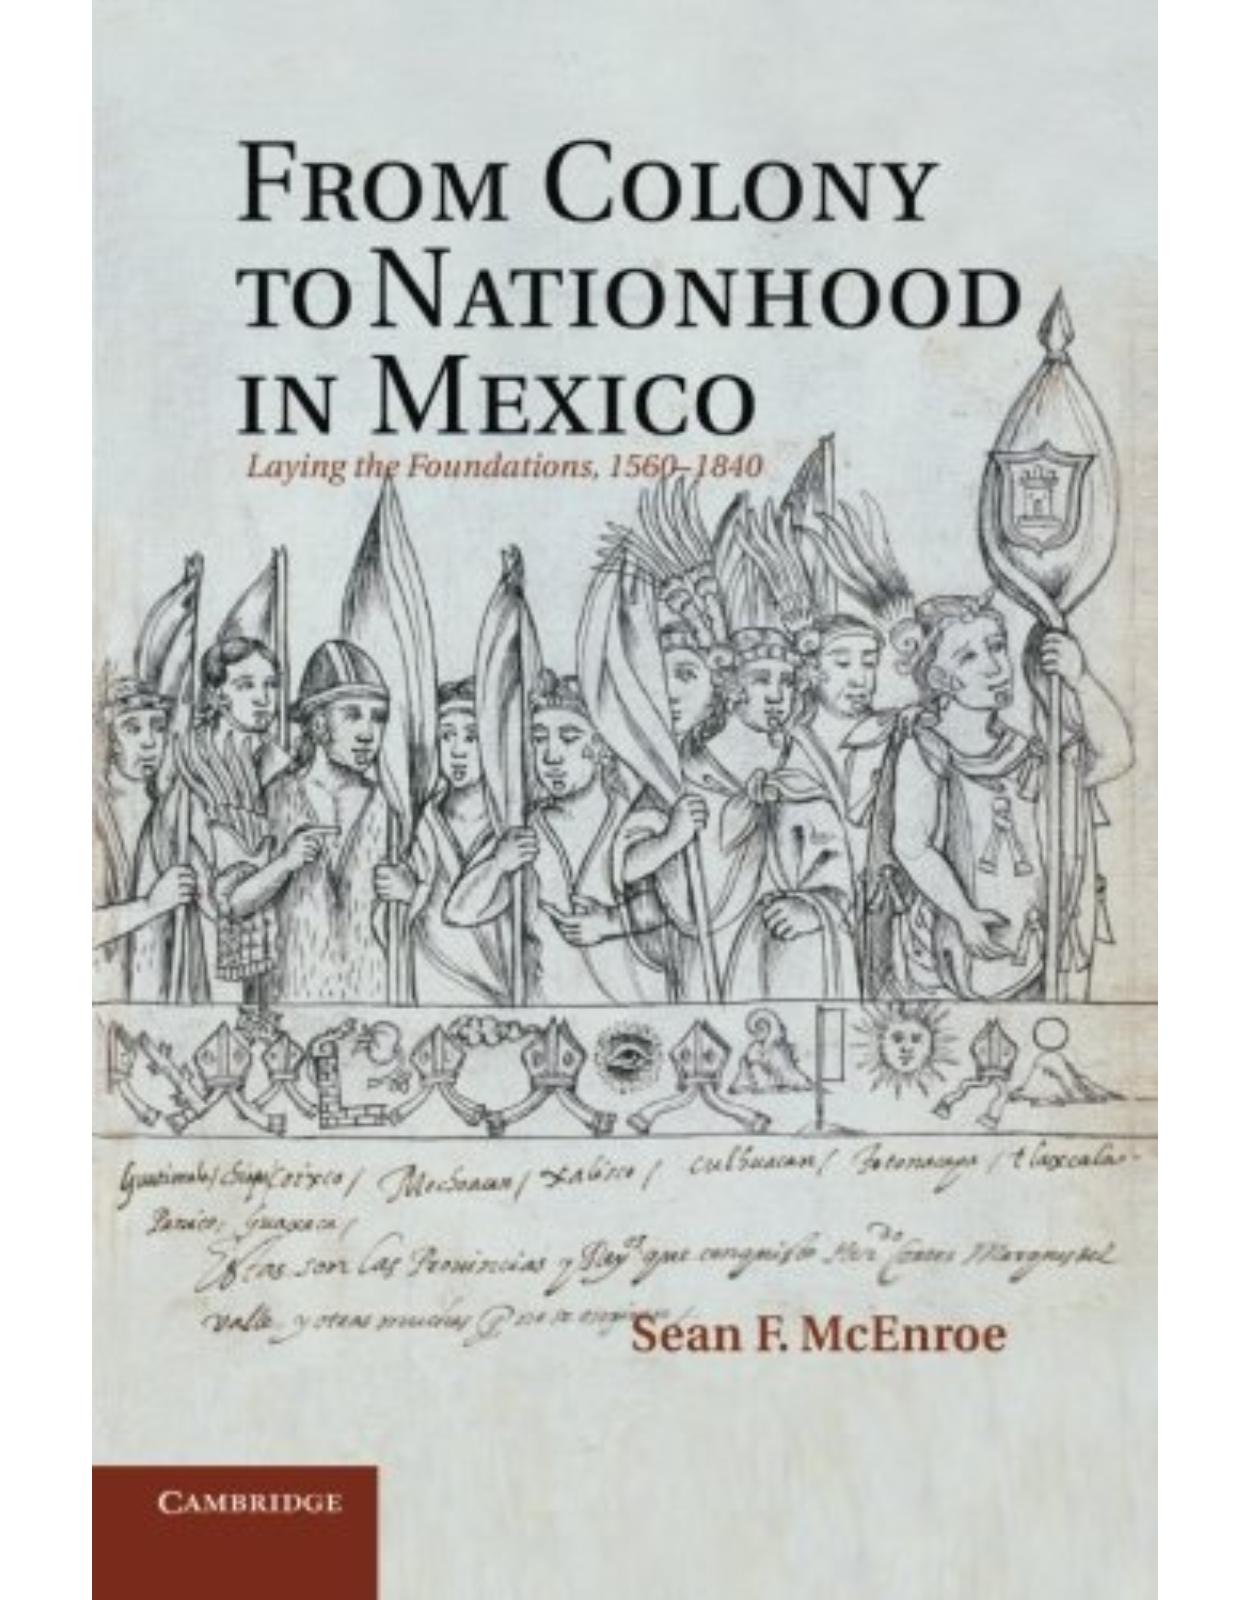 From Colony to Nationhood in Mexico: Laying the Foundations, 1560-1840